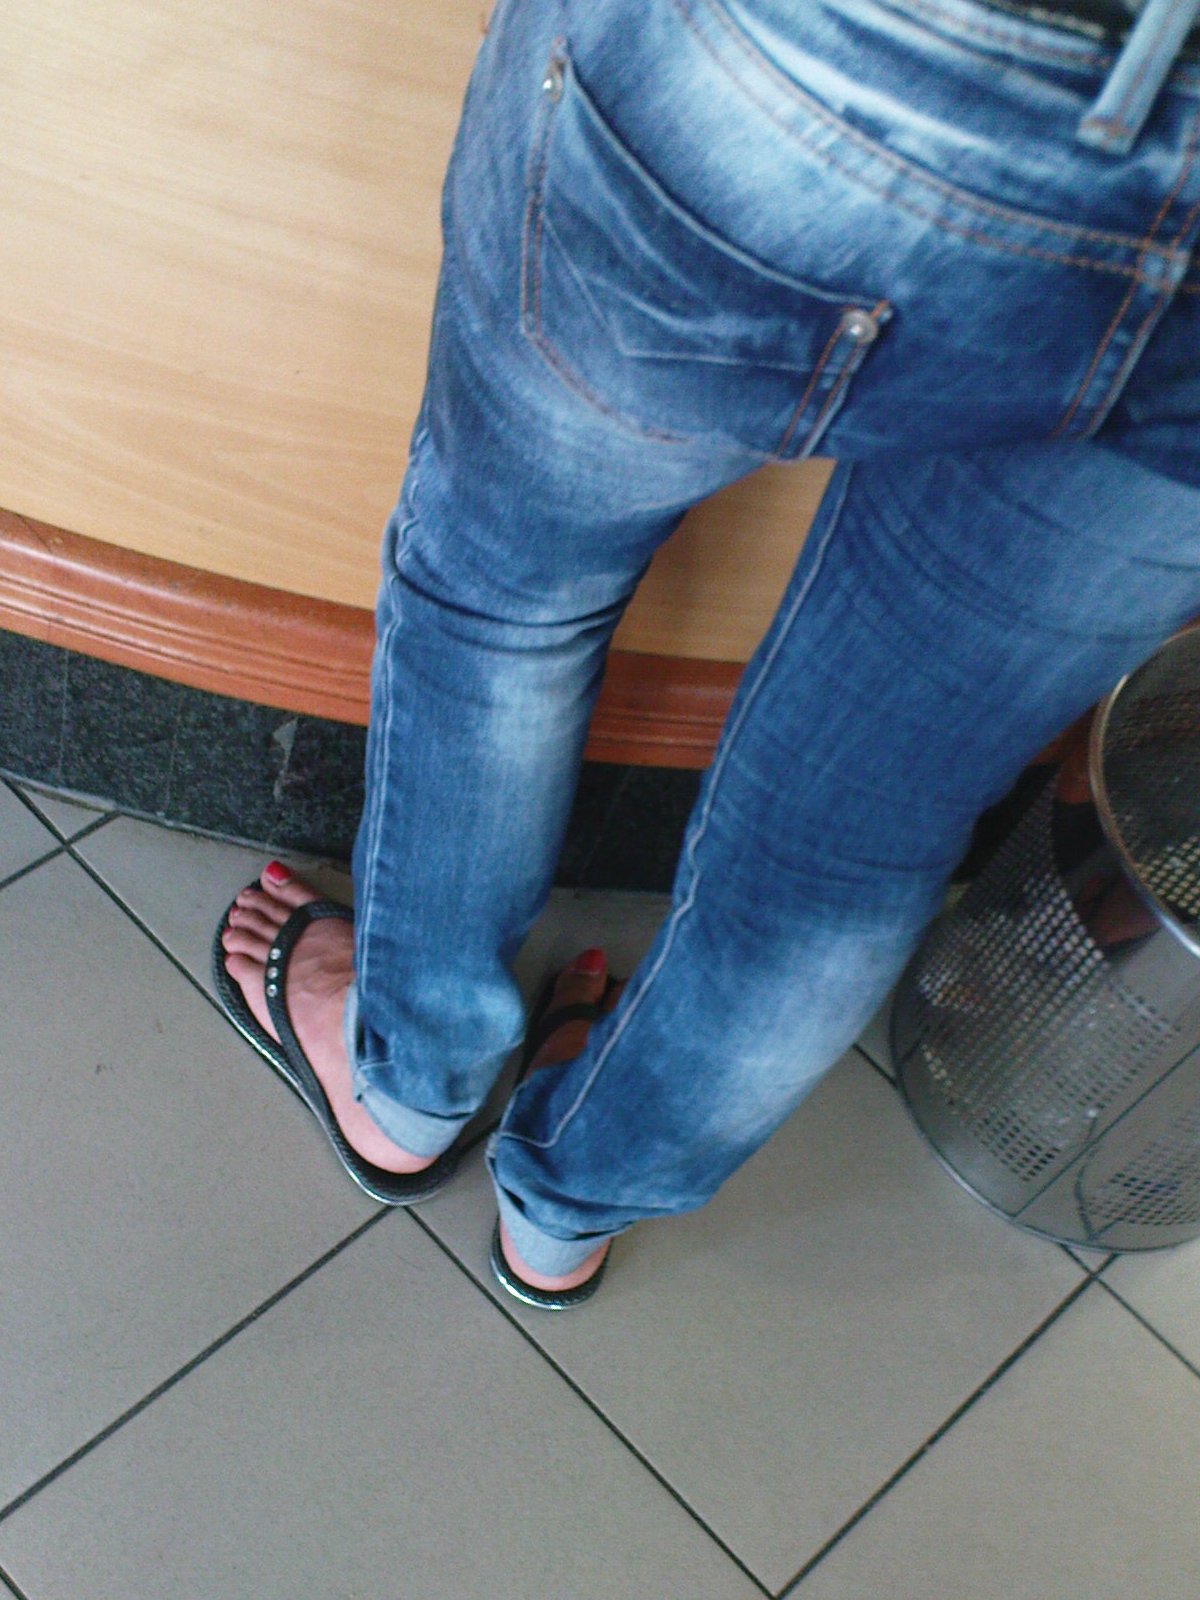 Legs And Feet On The Street Jeans And Flip Flops By The